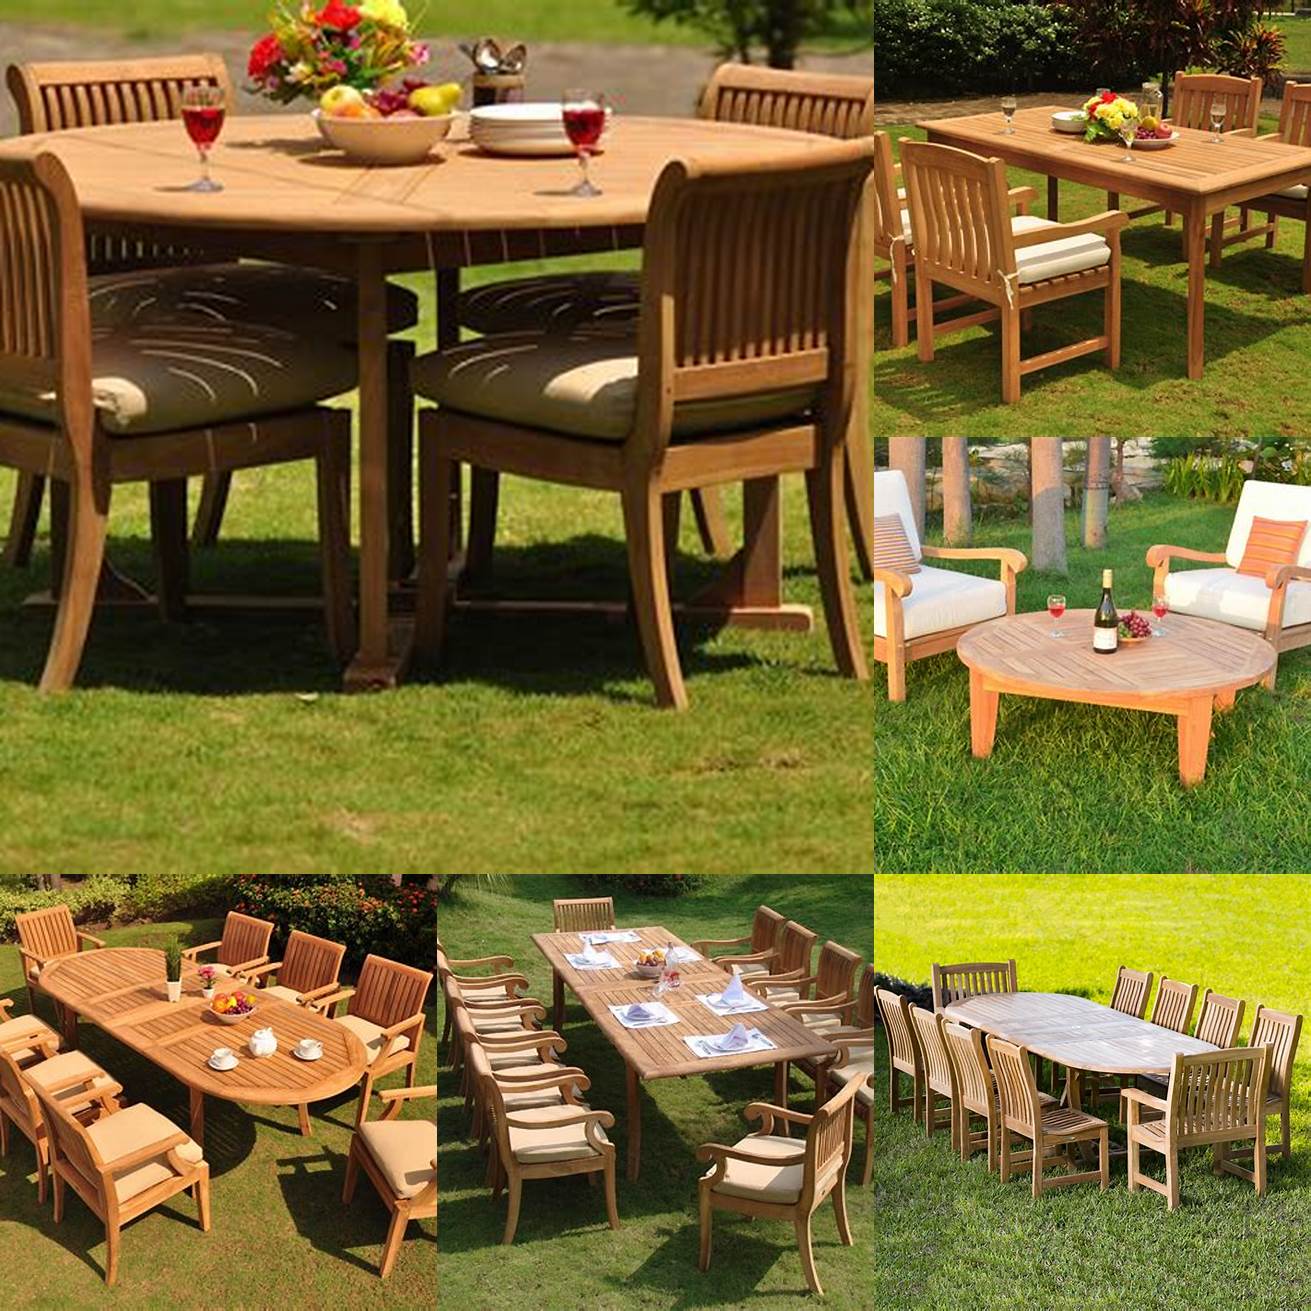 A Photo of Teak Furniture in Different Settings